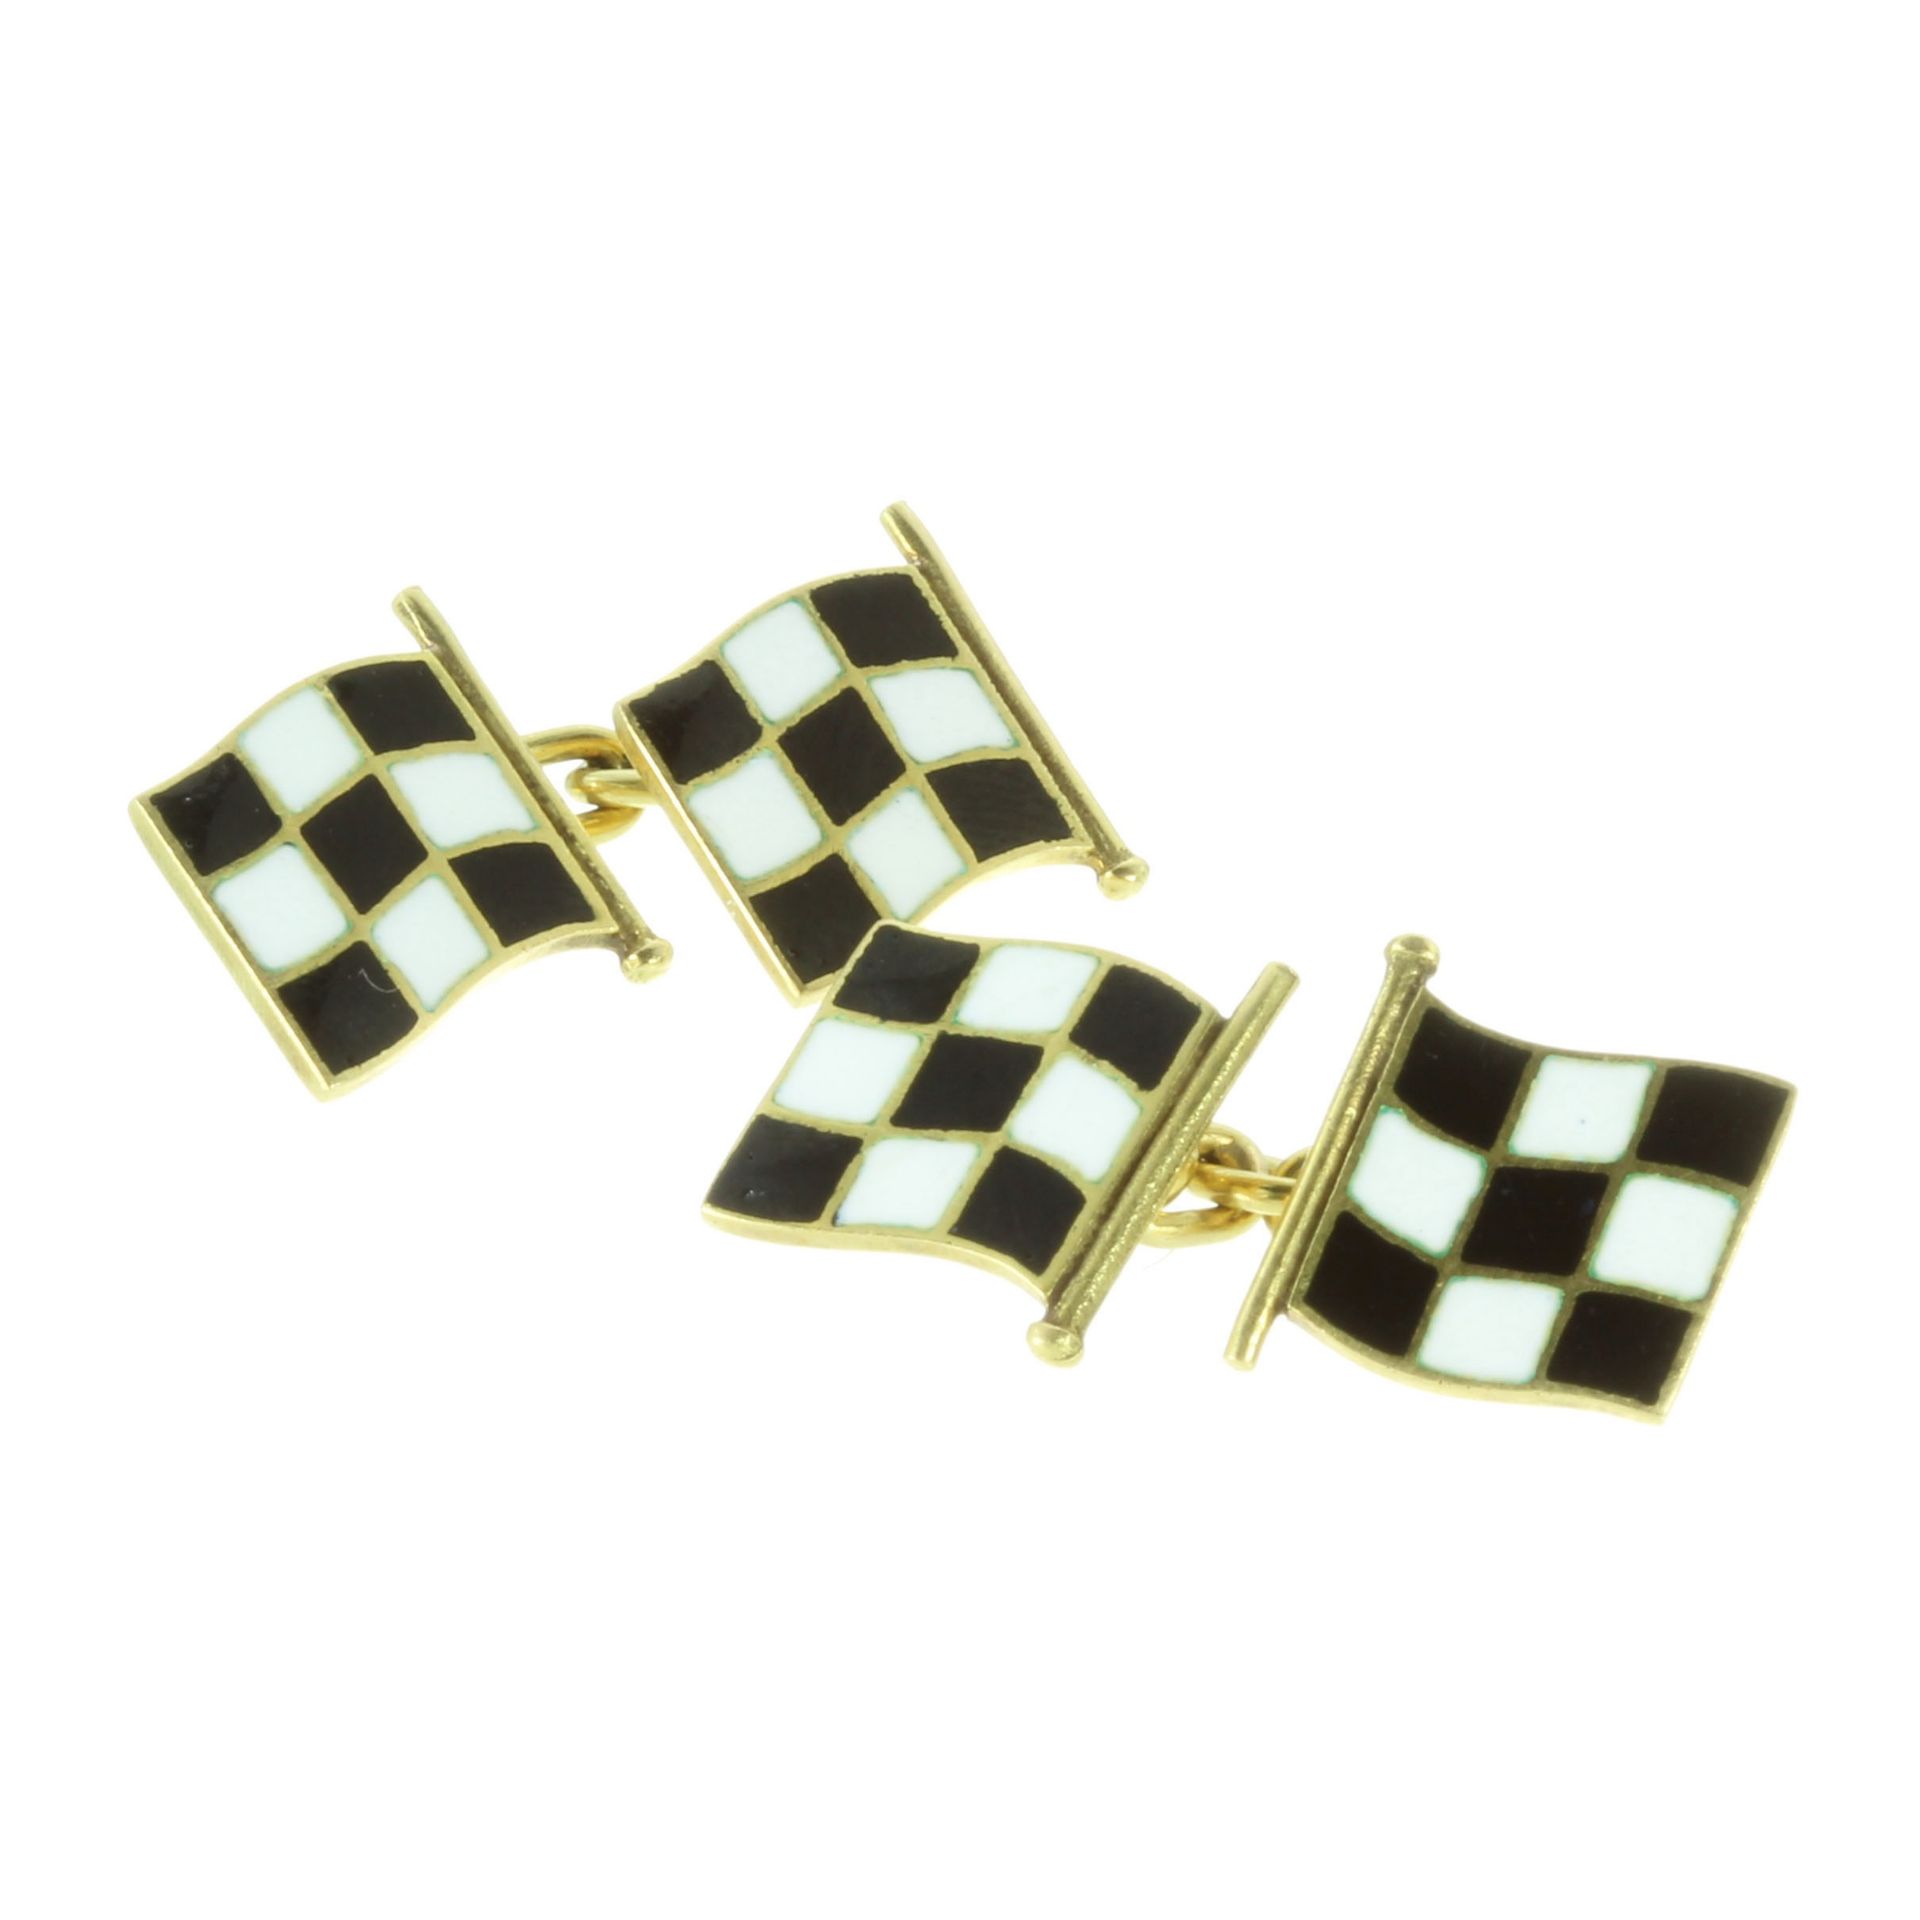 A PAIR OF ENAMEL RACING FLAG CUFFLINKS in yellow gold, each designed as two links in the form of